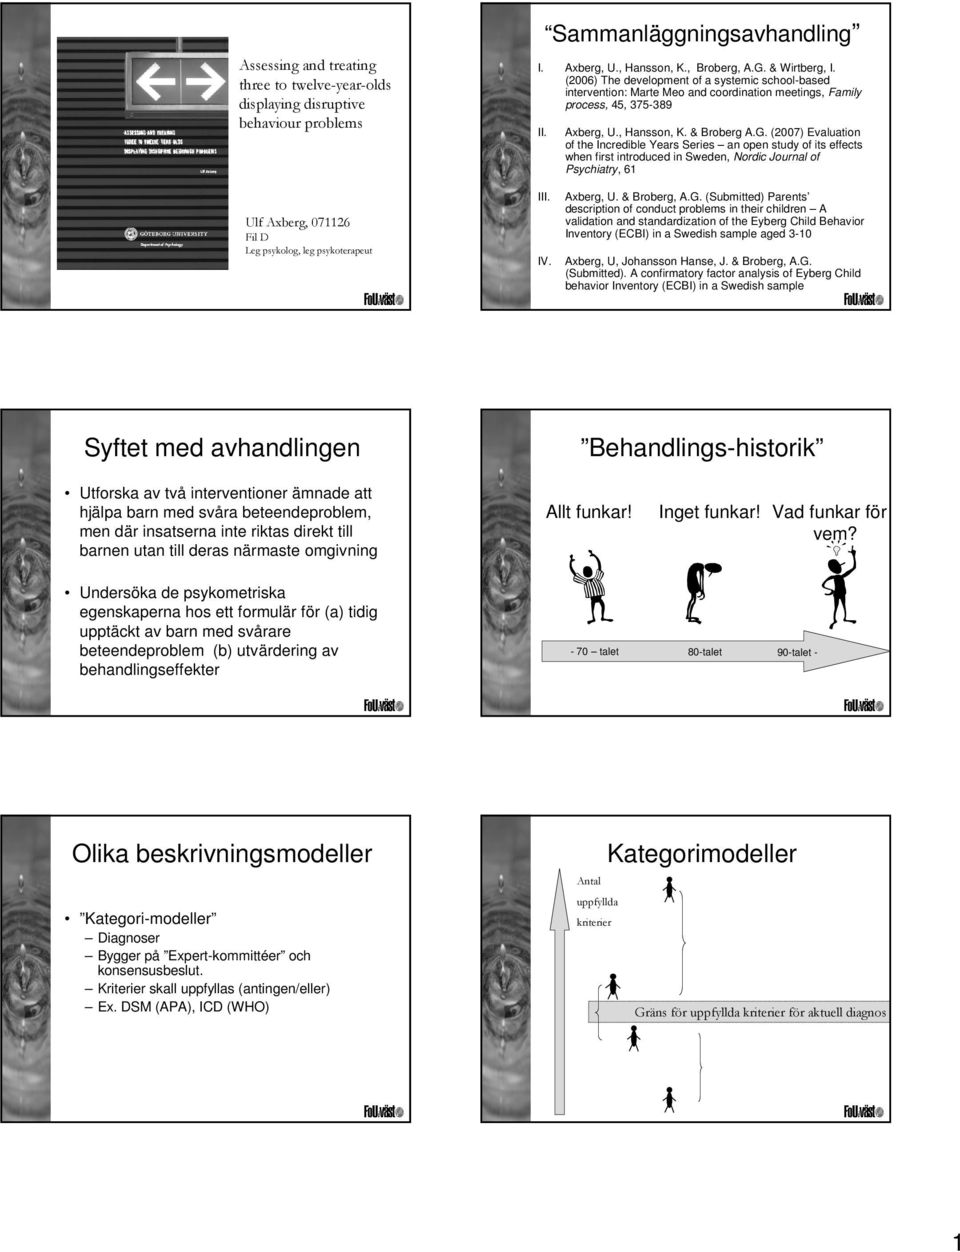 (27) Evaluation of the Incredible Years Series an open study of its effects when first introduced in Sweden, Nordic Journal of Psychiatry, 61 Ulf Axberg, 71126 Fil D Leg psykolog, leg psykoterapeut